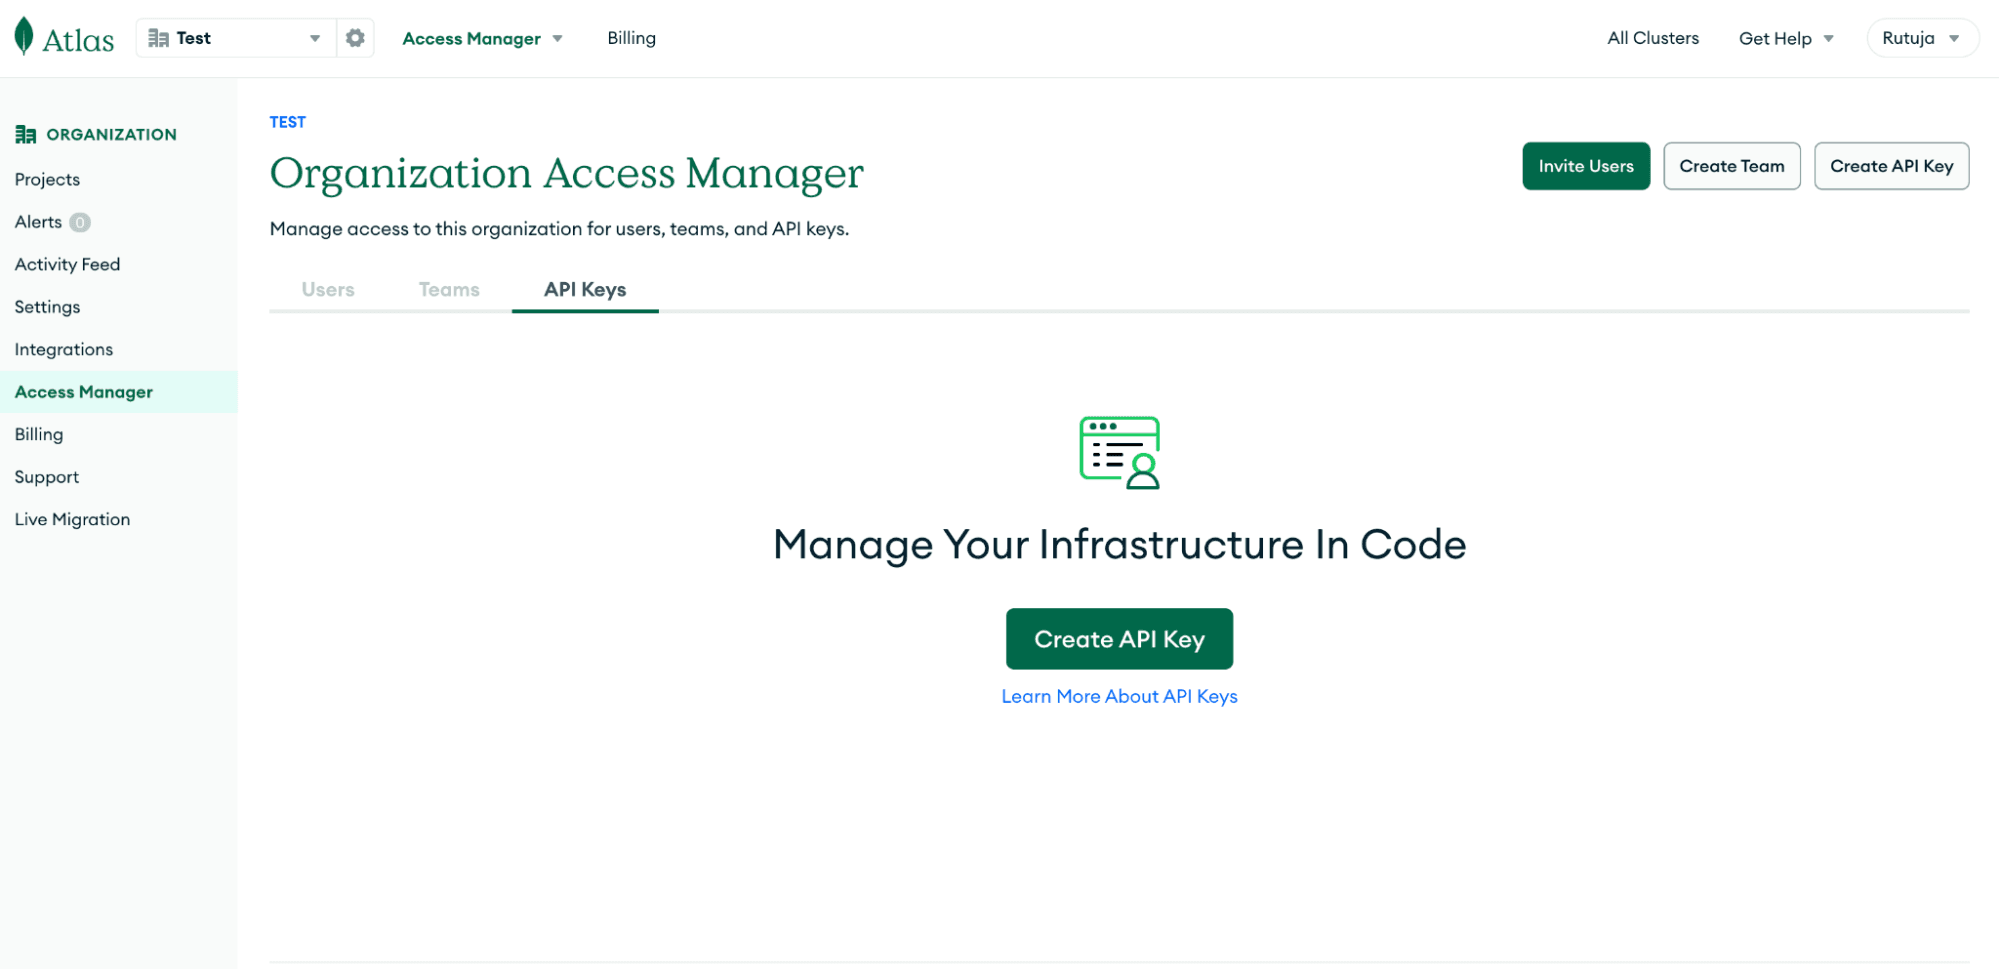 An interface for the Atlas Access Manager.